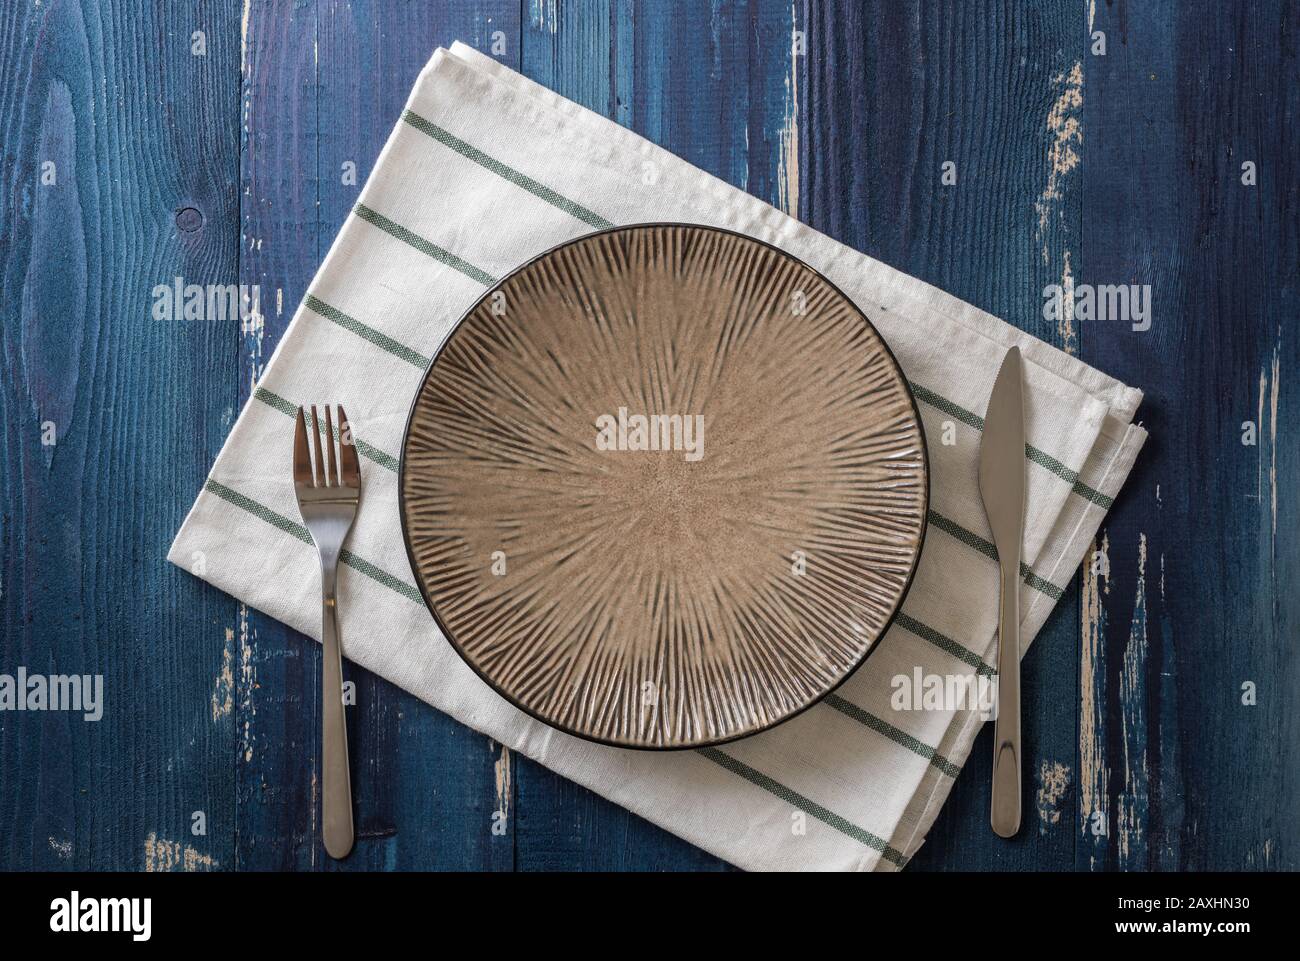 Round Plate with utensils and dish towel on ocean blue wooden table background Stock Photo